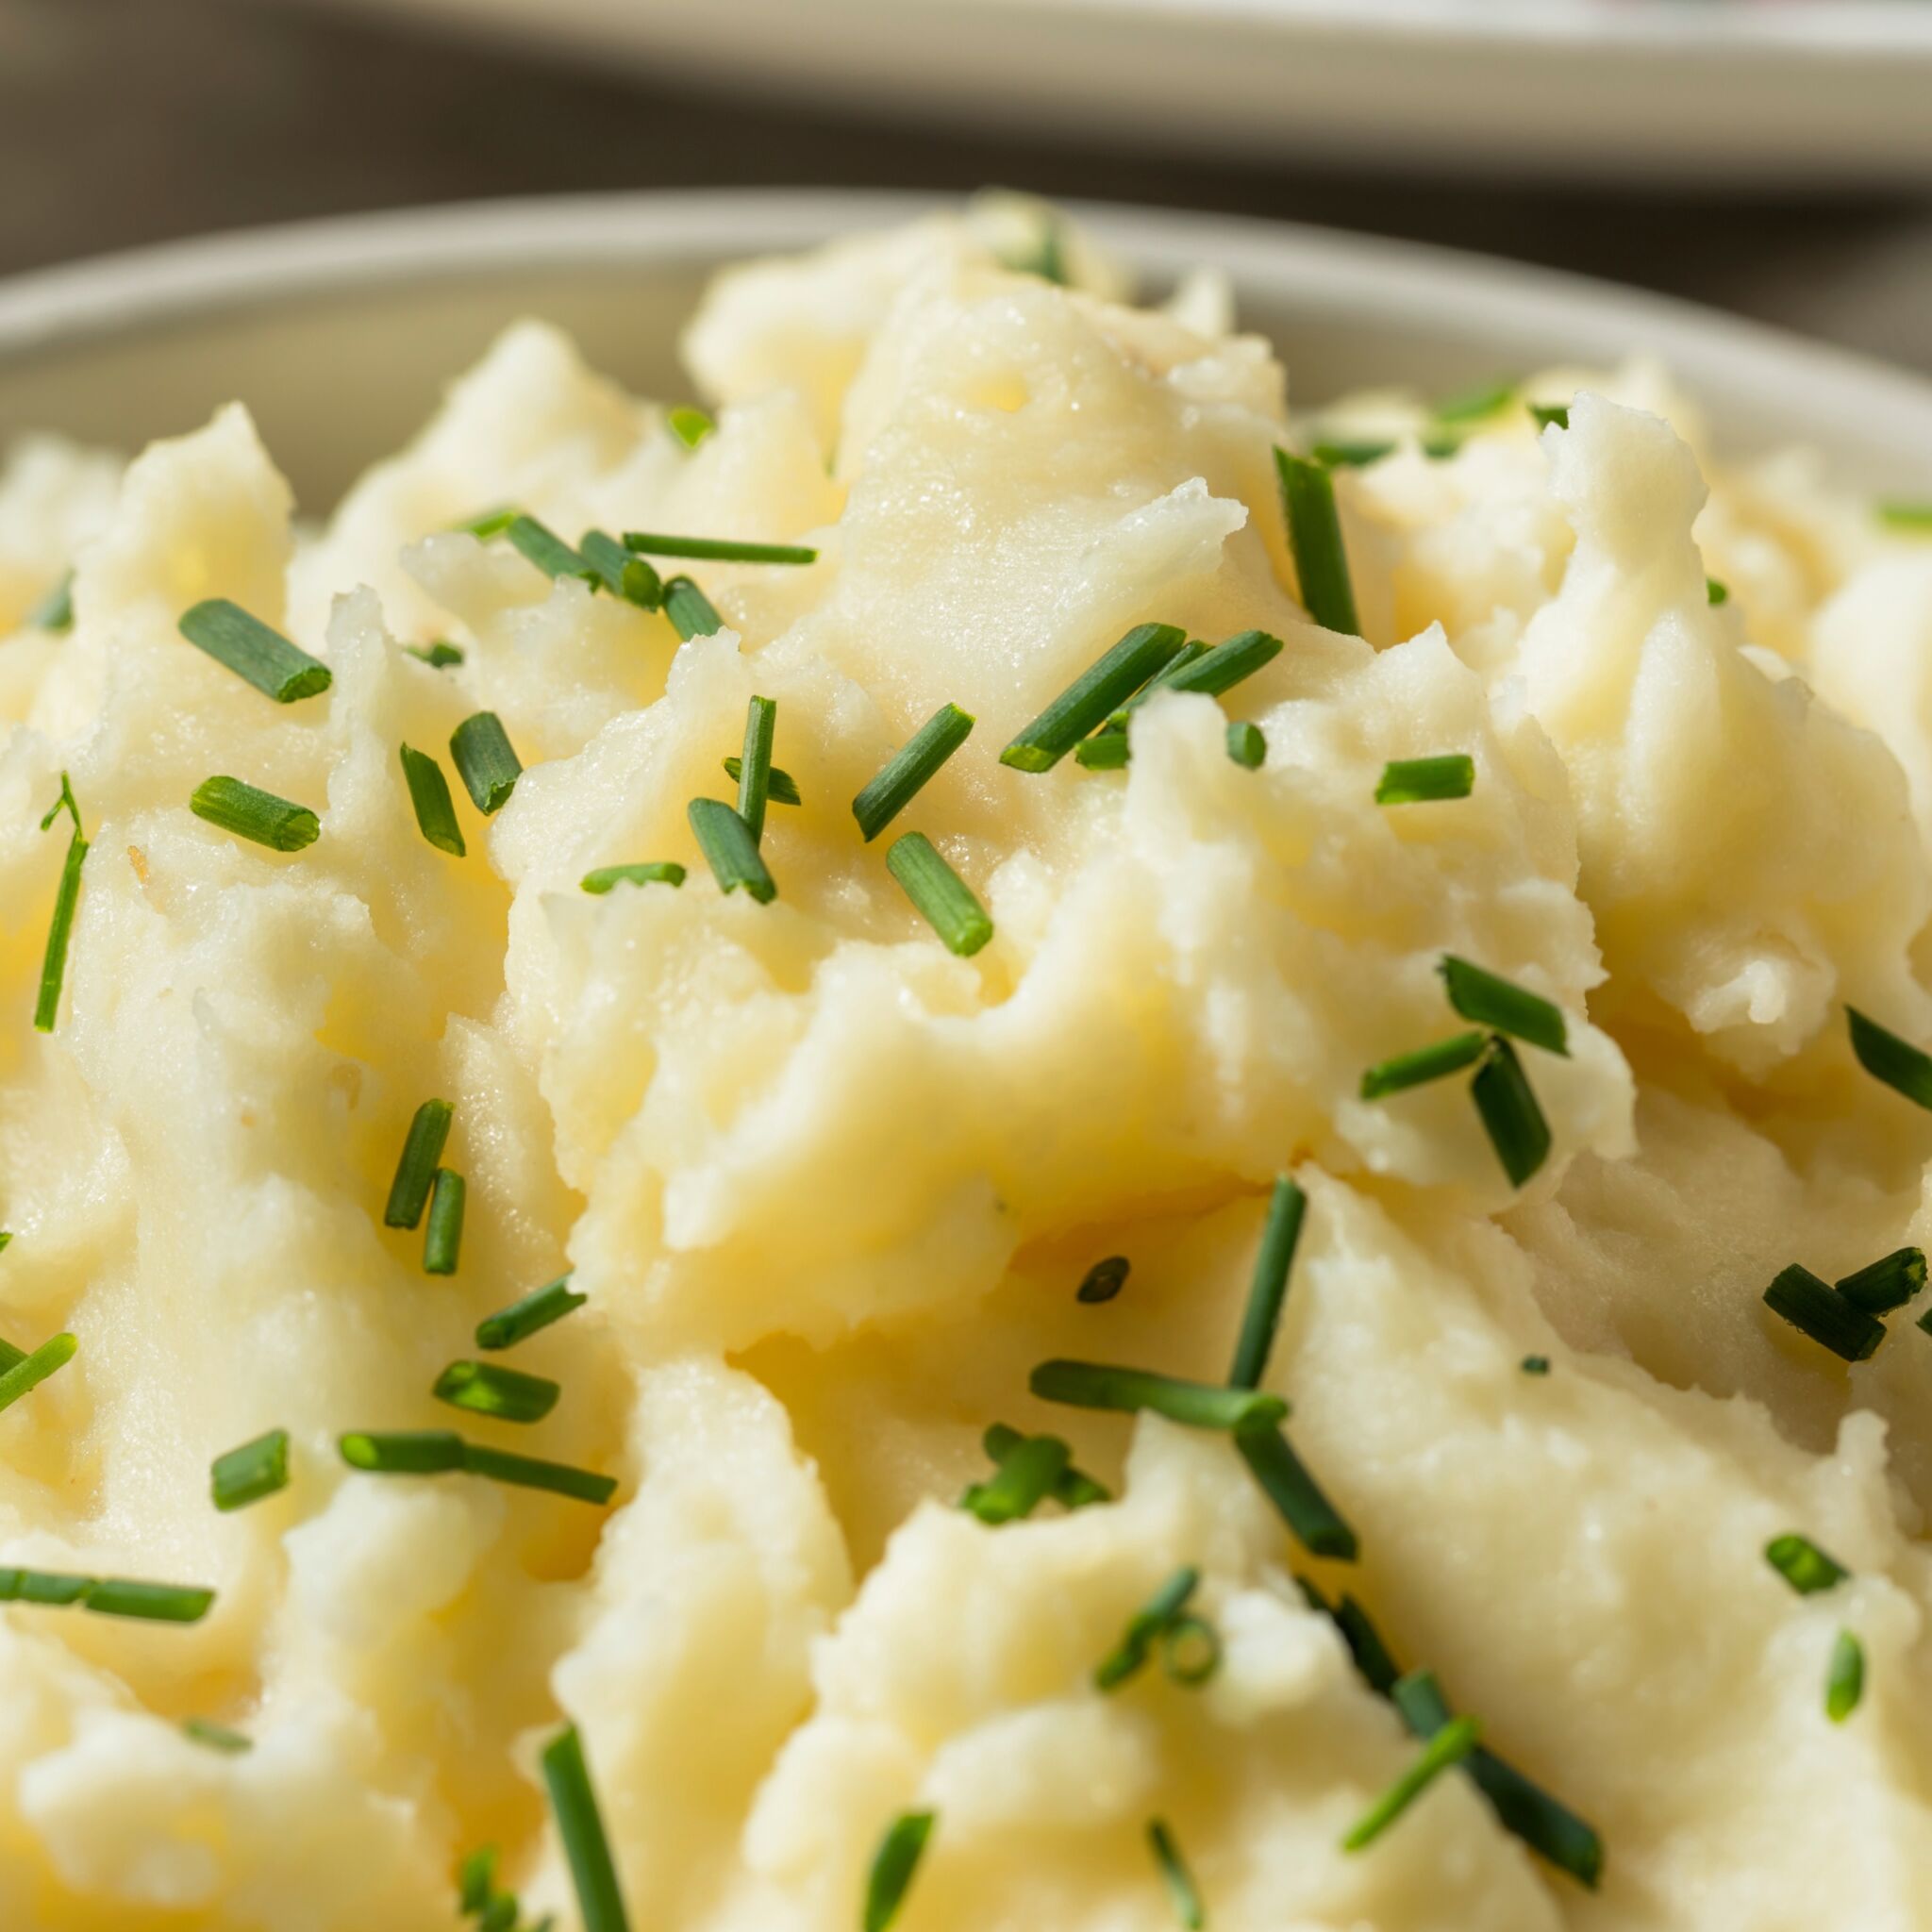 Mashed Potatoes with Sour Cream - Comfortable Food